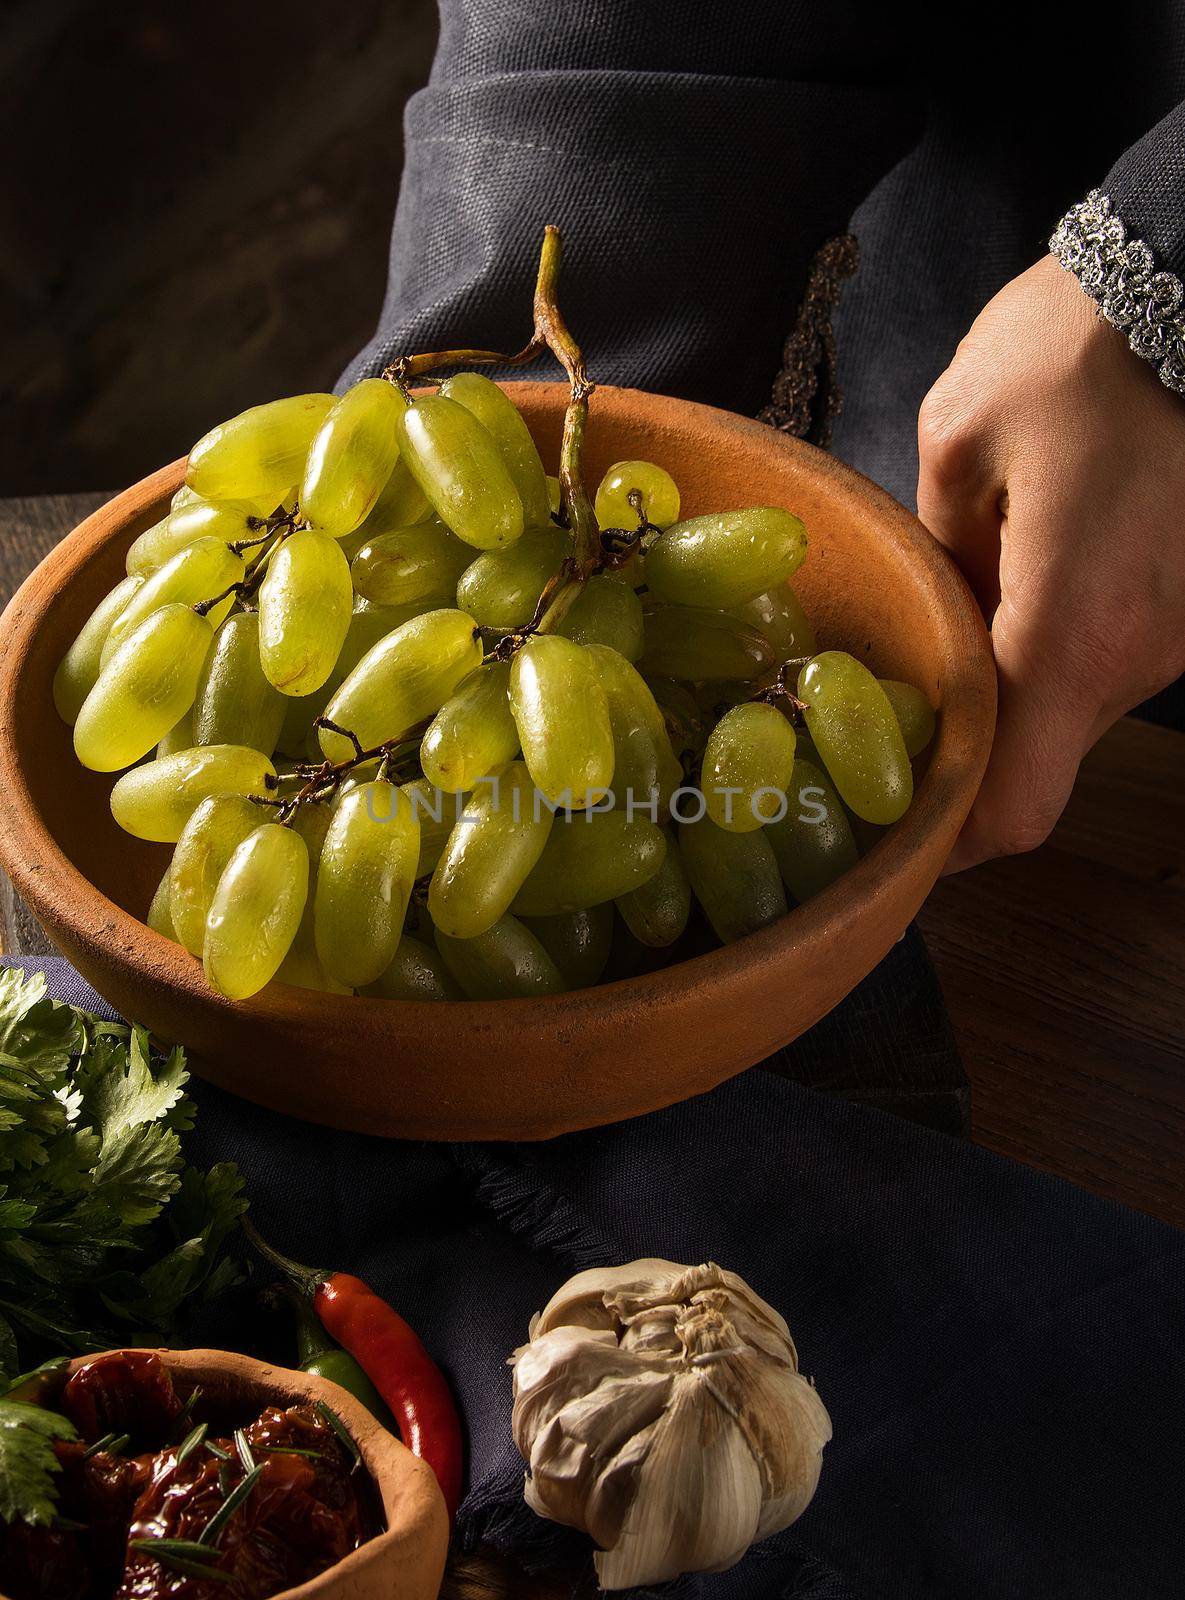 Shot of grapes in a bowl by A_Karim